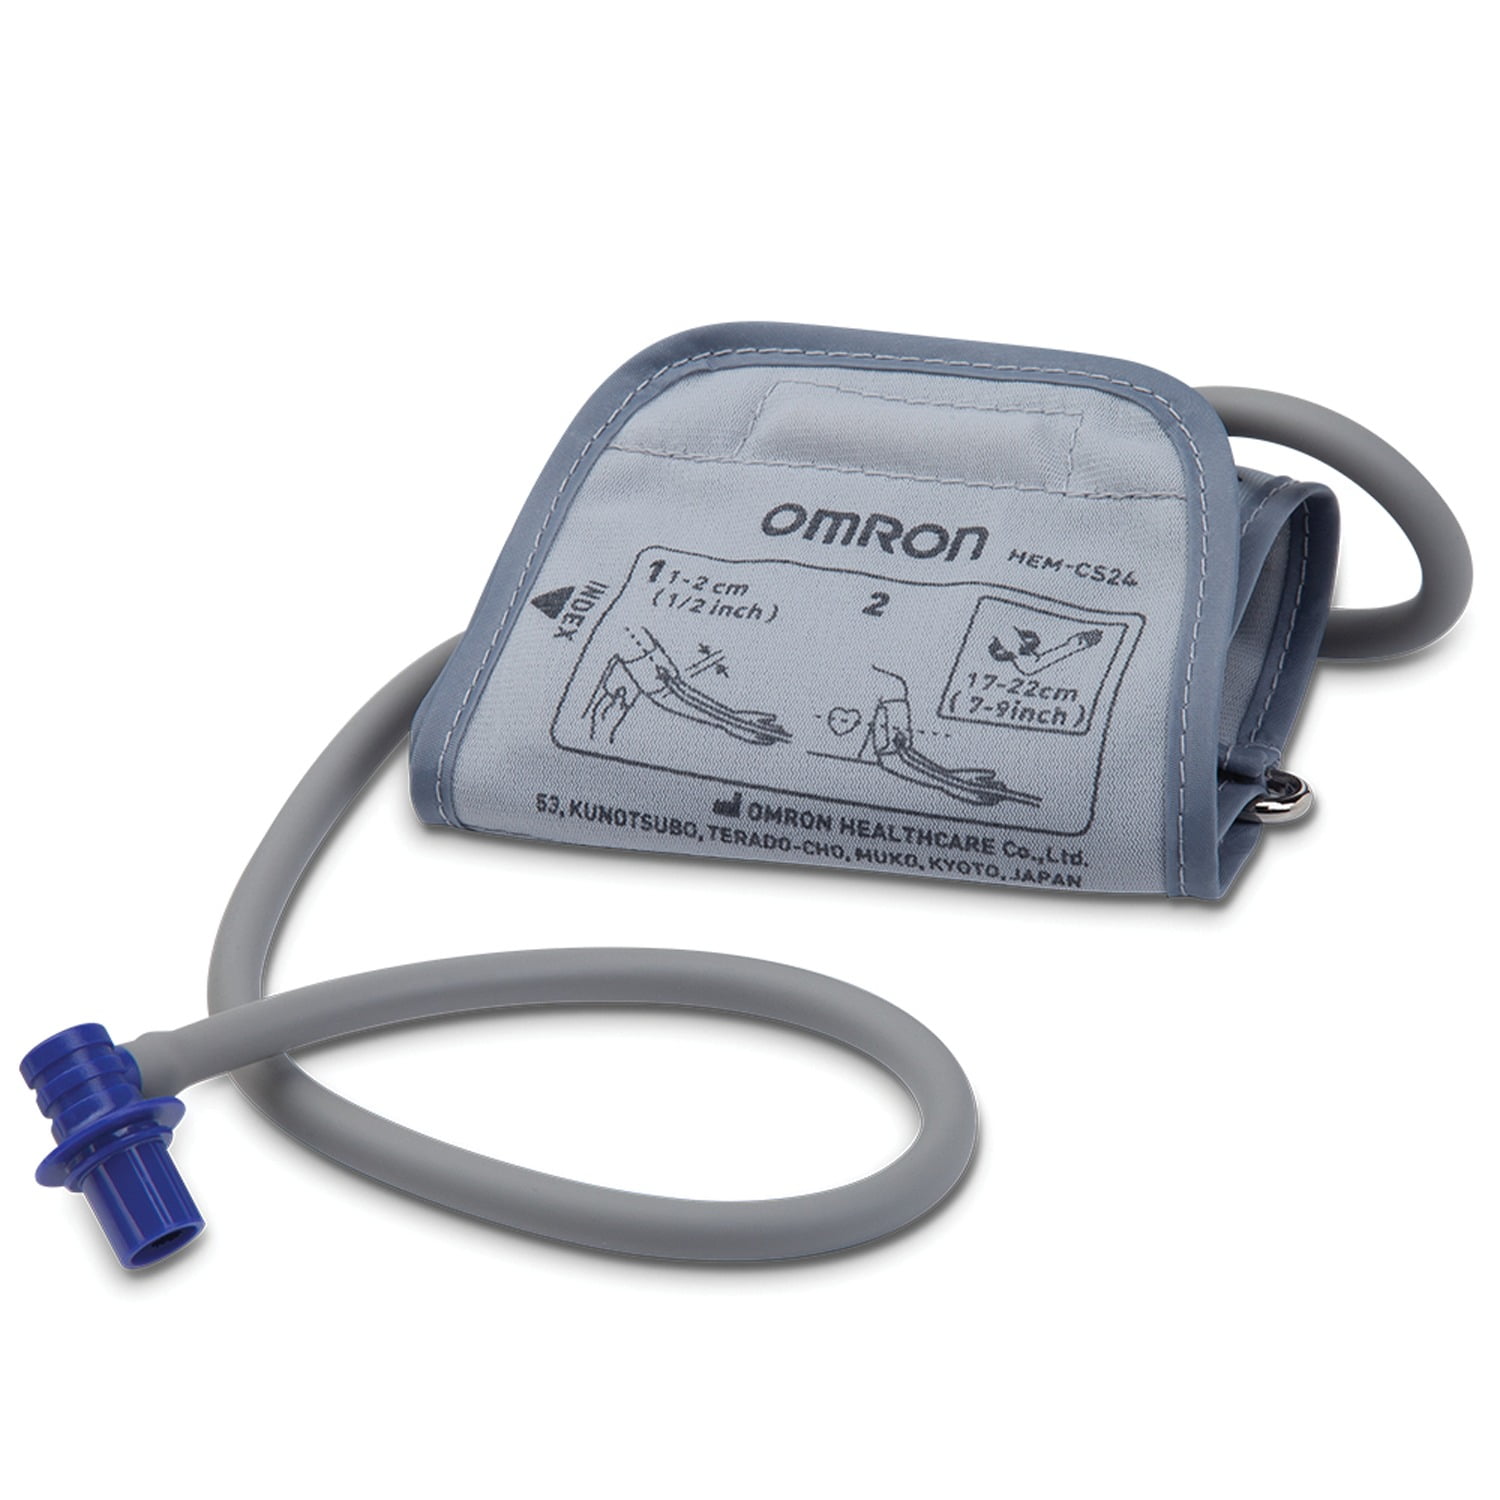 Omron 3 Series Upper Arm Blood Pressure Monitor With Cuff - Fits